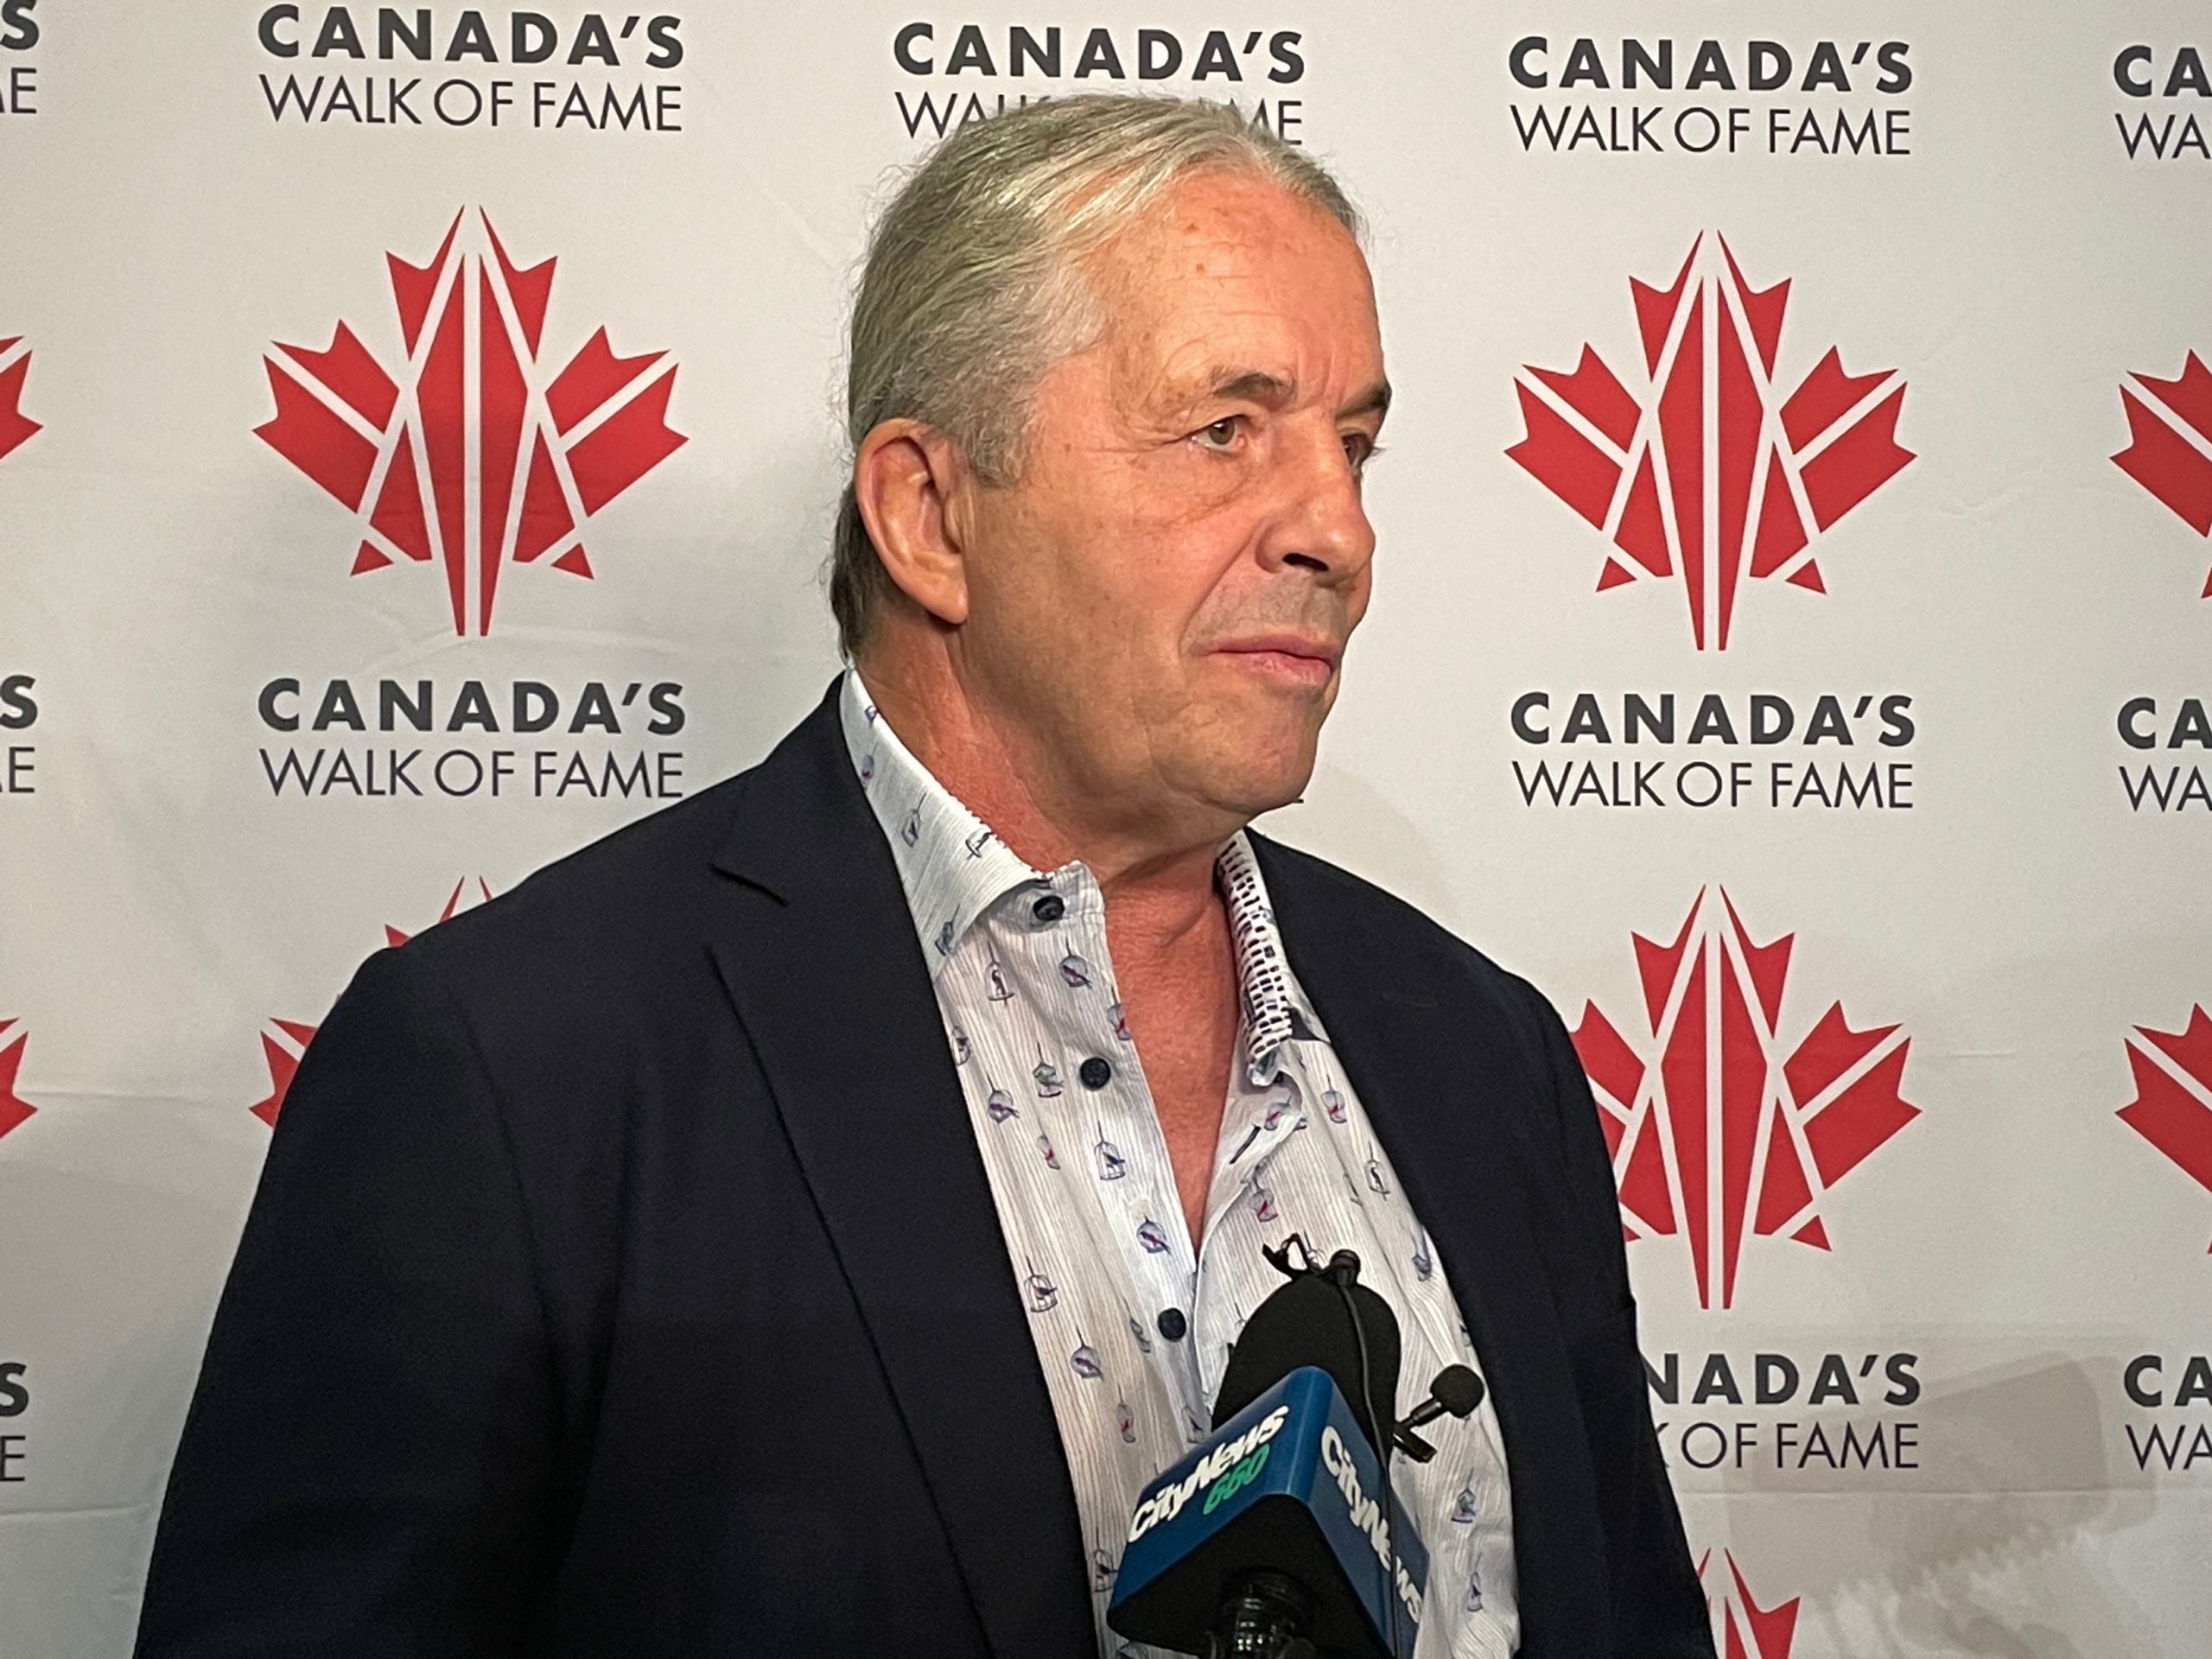 Bret 'Hitman" Hart speaks to reporters after receiving a replica plaque of his star on Canada's Walk of Fame at the Victoria Pavilion on Stampede Grounds